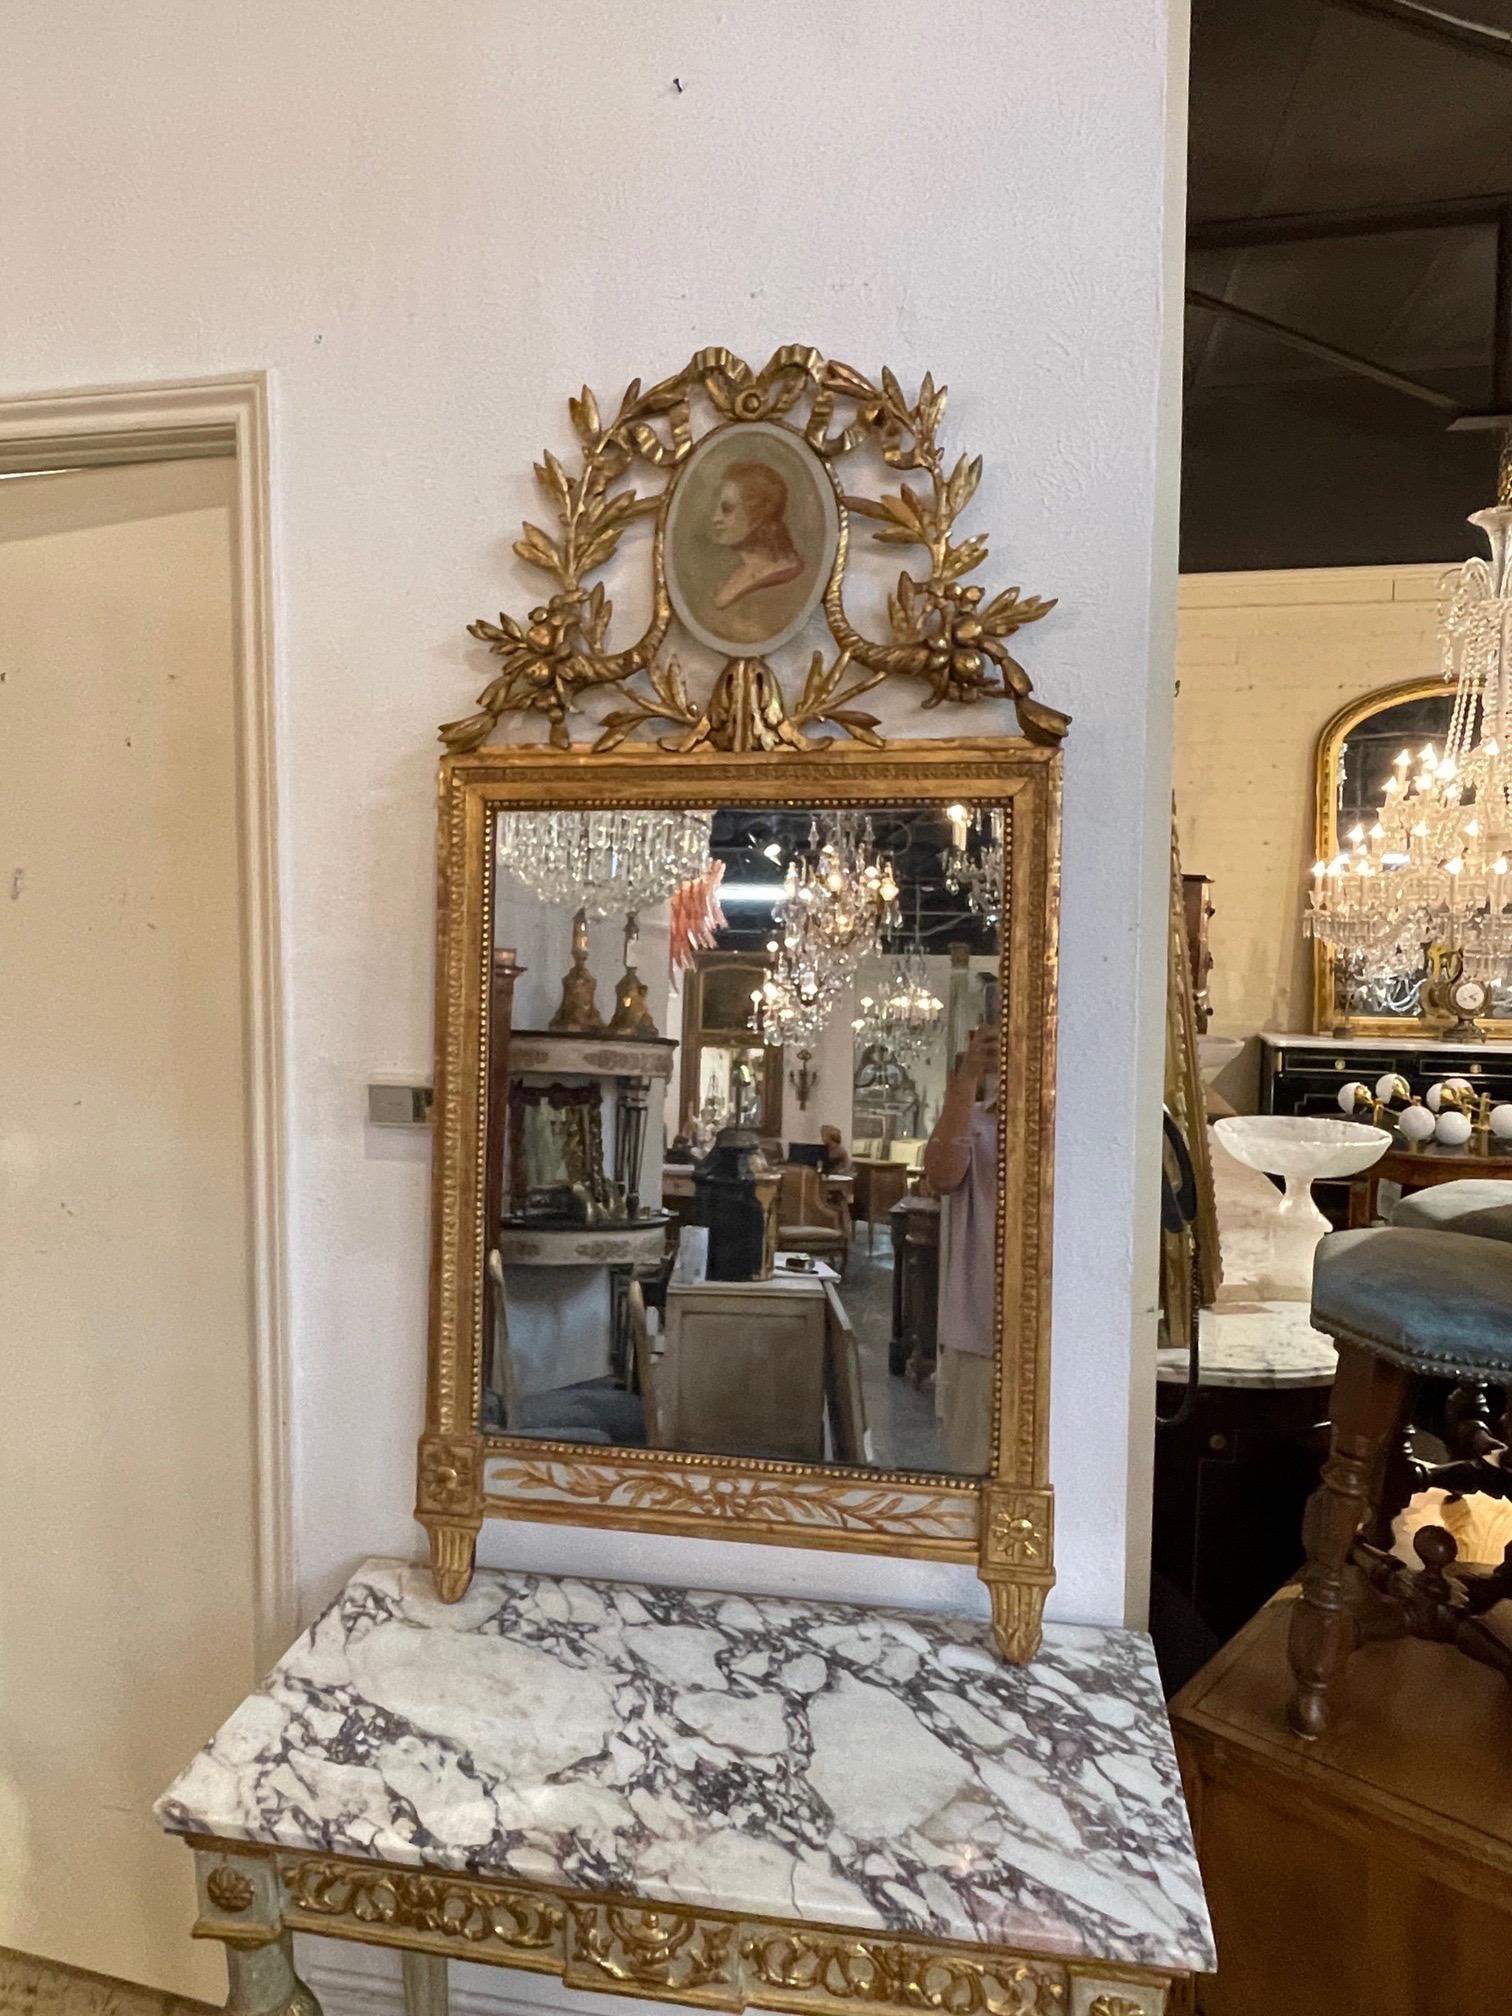 Gorgeous 18th century Italian carved and parcel gilt neoclassical mirror. Exceptional carvings and a lovely painted image of a woman at the top. A very fine piece!!